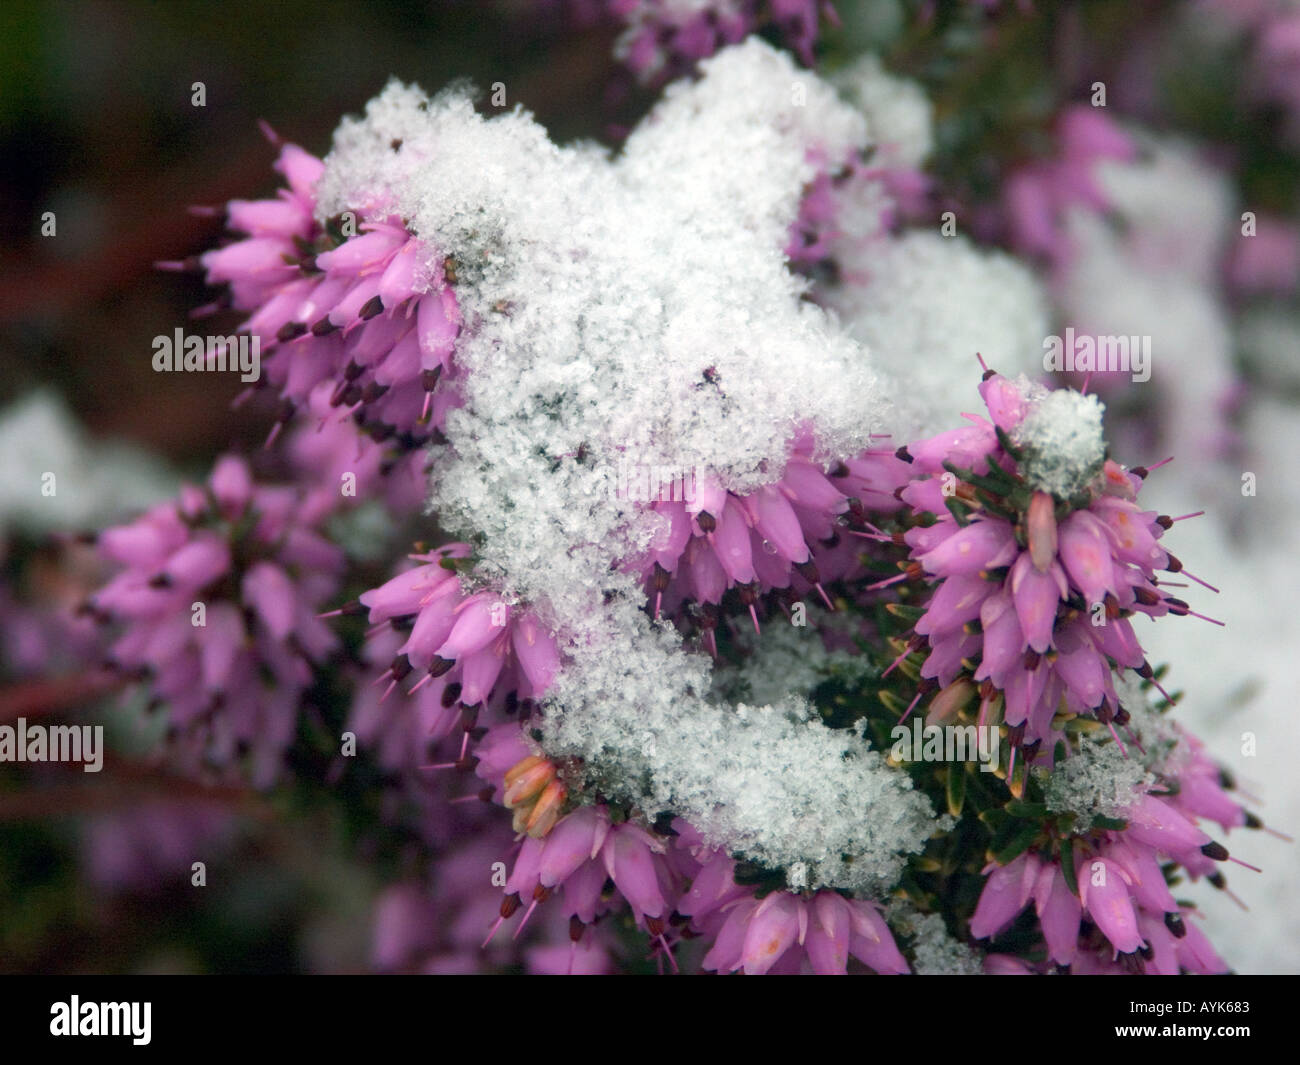 Purple heather with a covering of melting snow Stock Photo